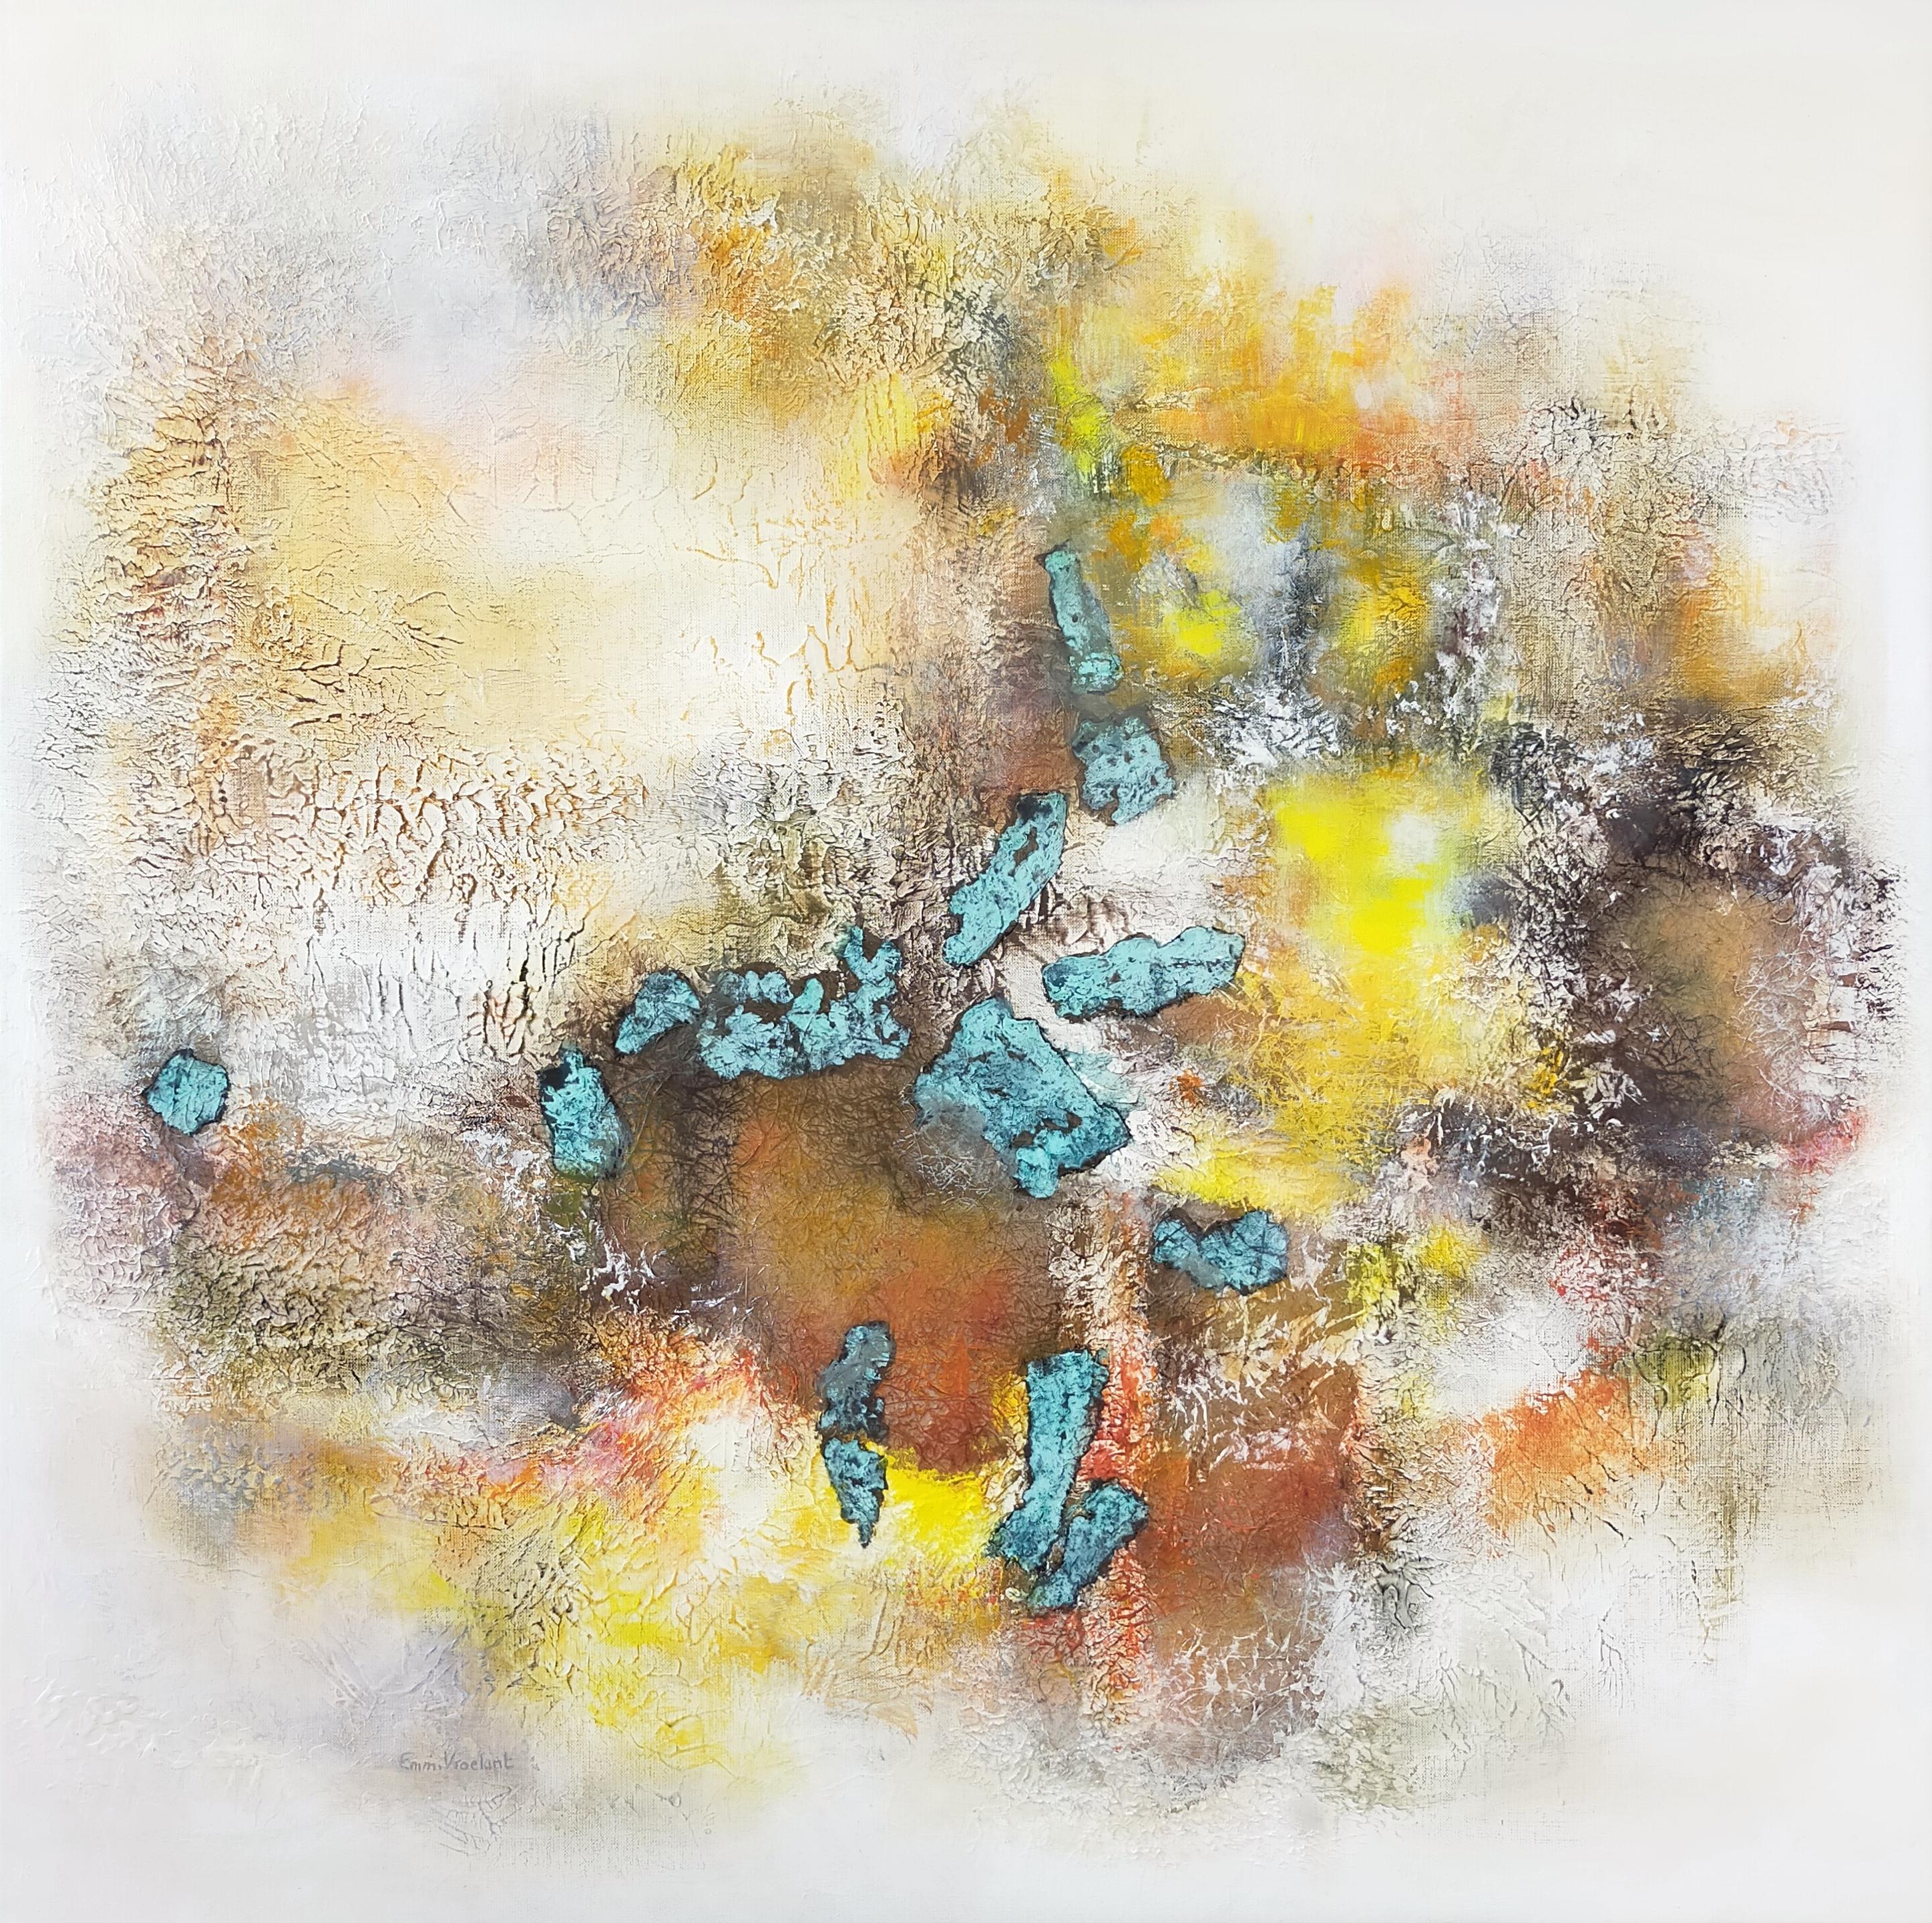 Emmanuelle Vroelant Abstract Painting - "The unexpected" abstract painting acrylique oxidation on linen canvas 100x100cm